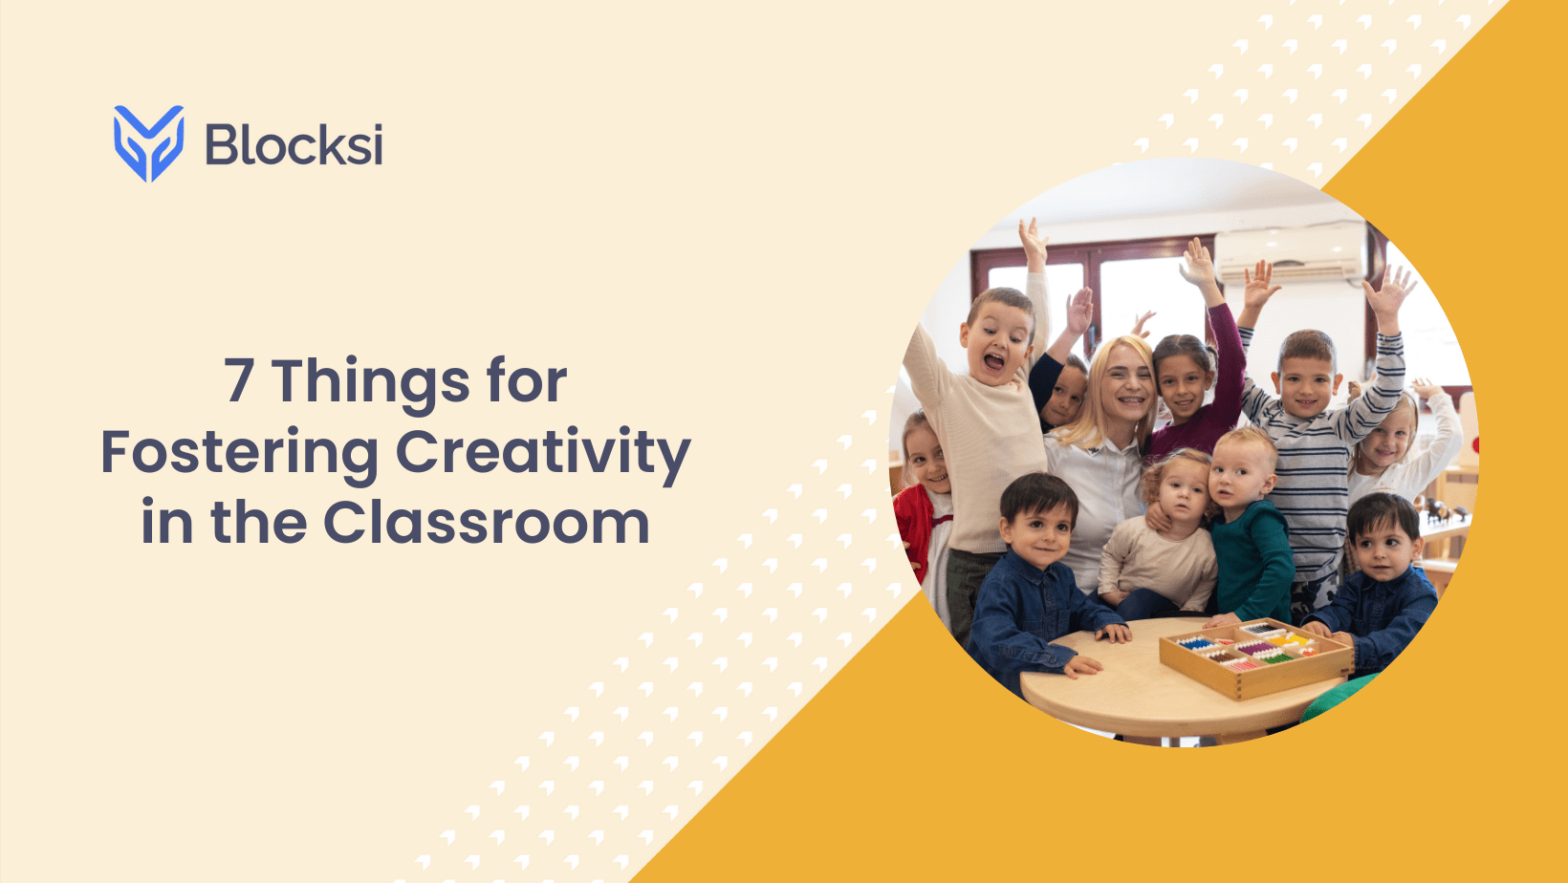 7 Things for Fostering Creativity in the Classroom